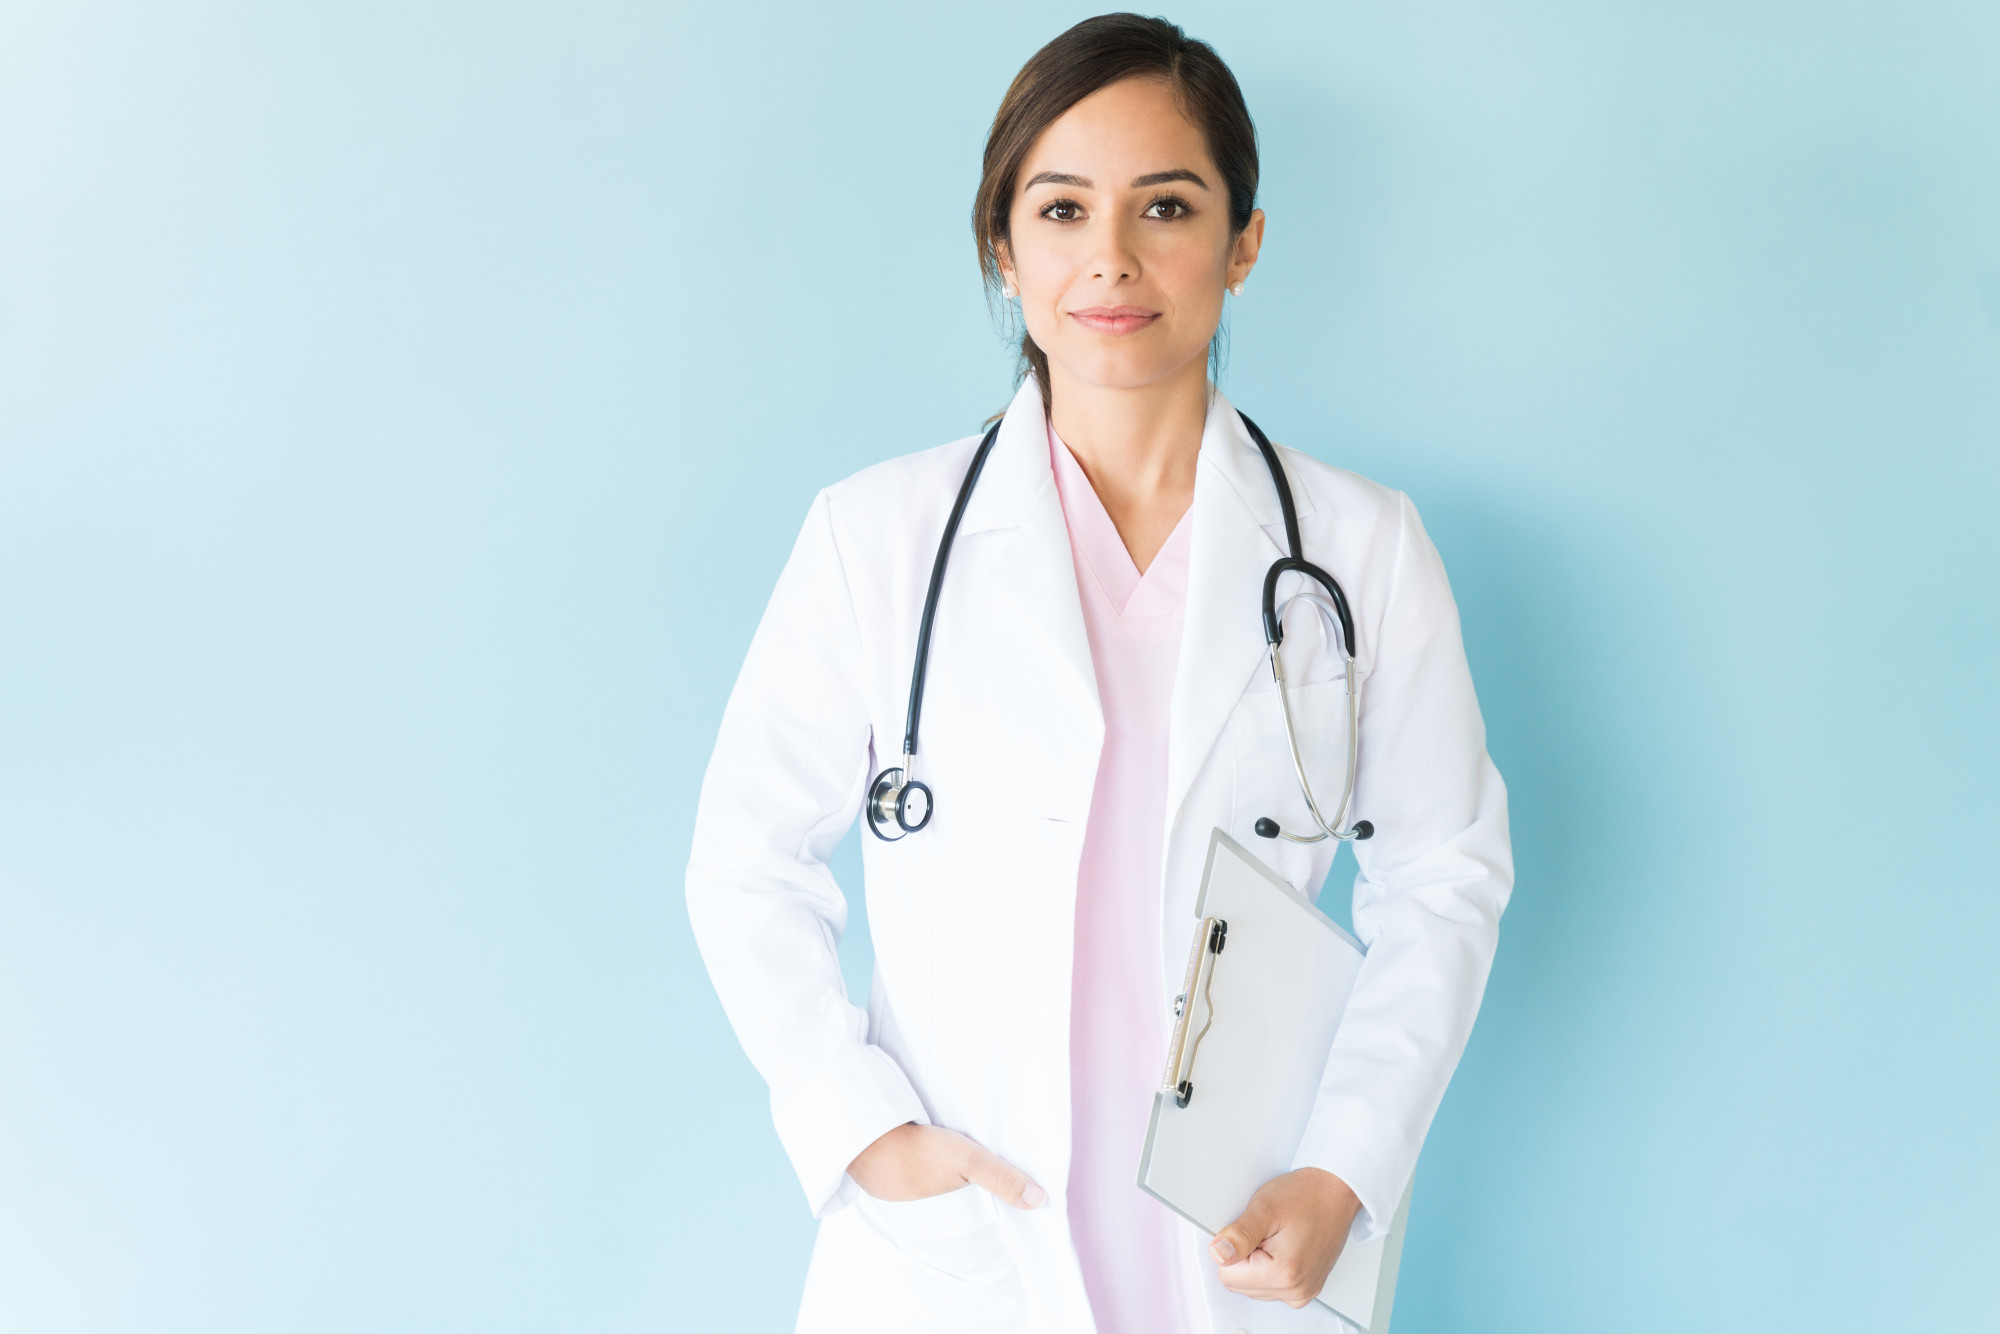 Good looking medical professional with stethoscope and clipboard against plain background